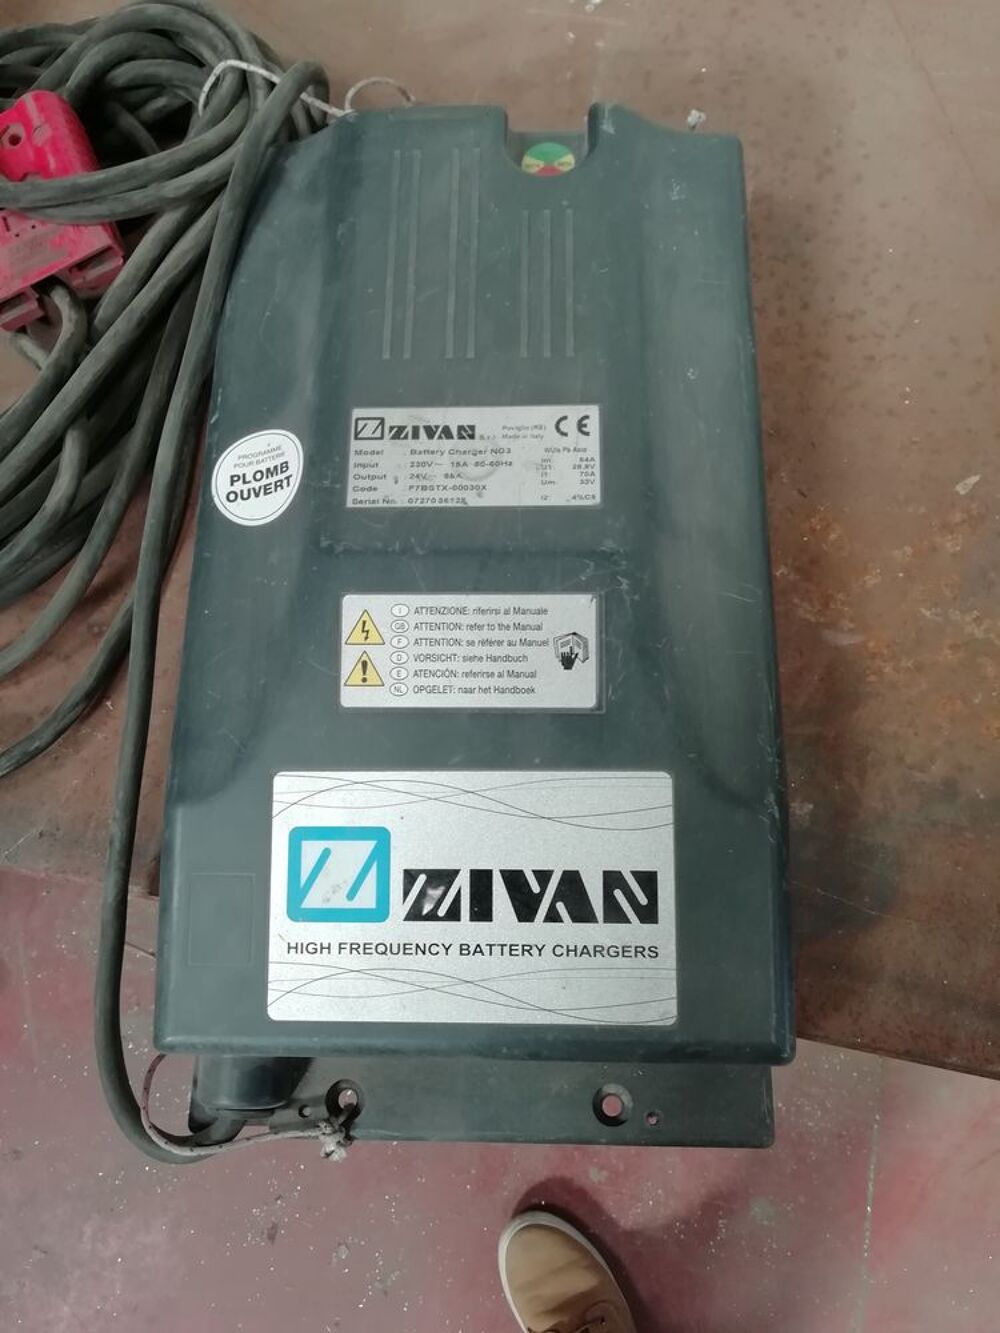 Chargeur ZIVAN NG3 24V 85A
Bricolage